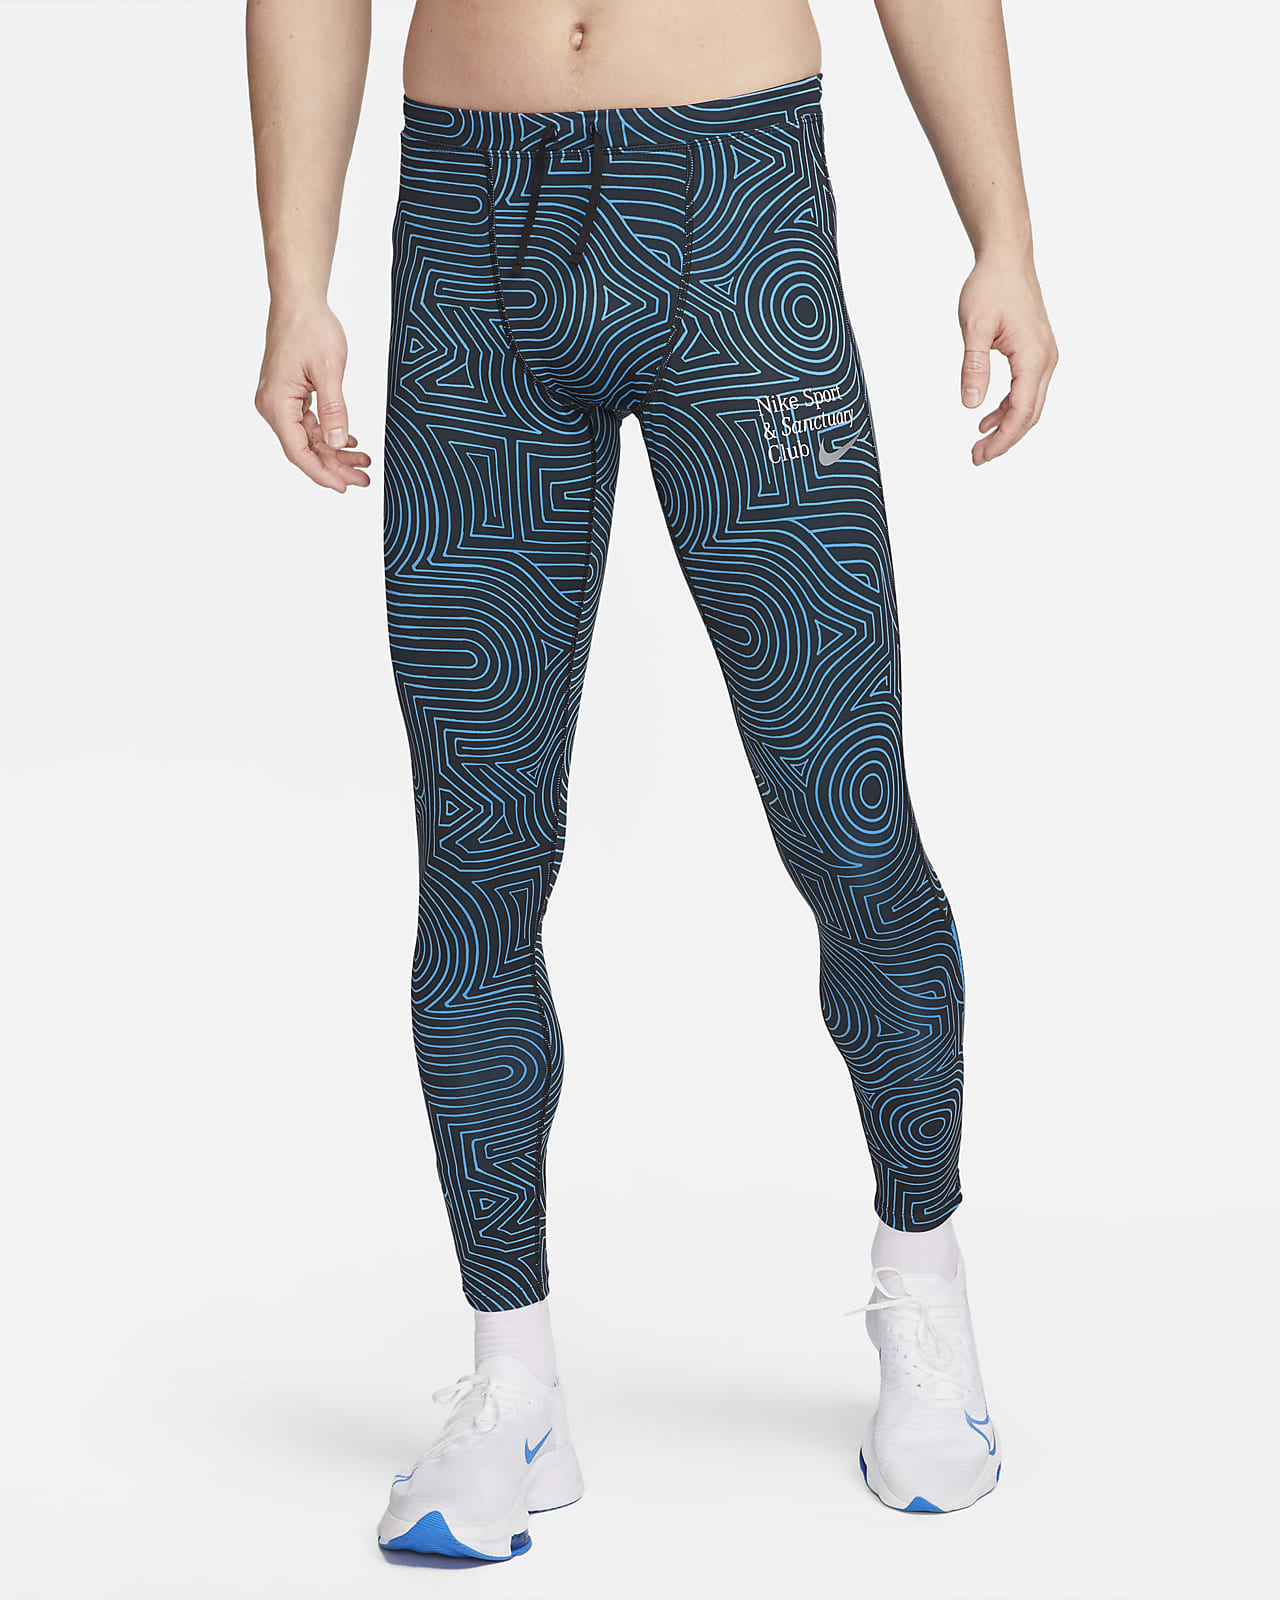 Training & Gym Trousers & Tights. Nike CA